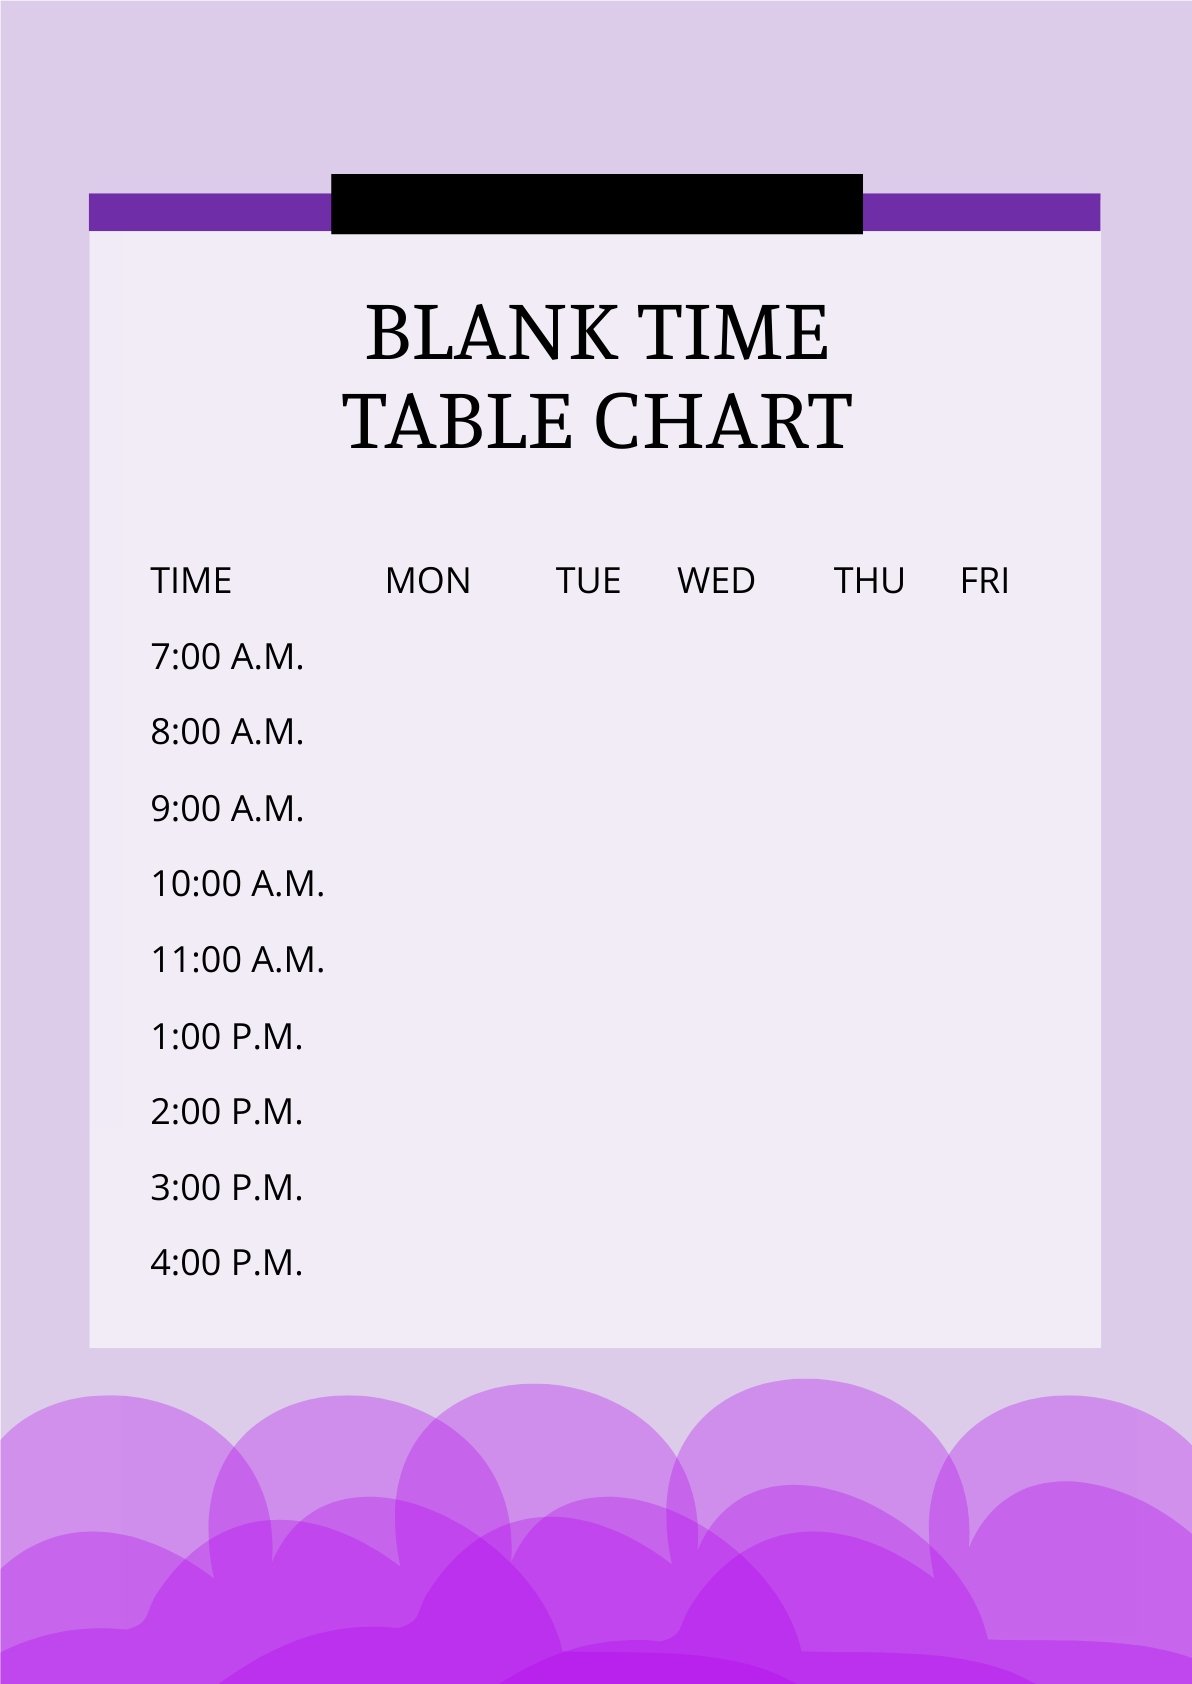 Blank Time Table Chart Template